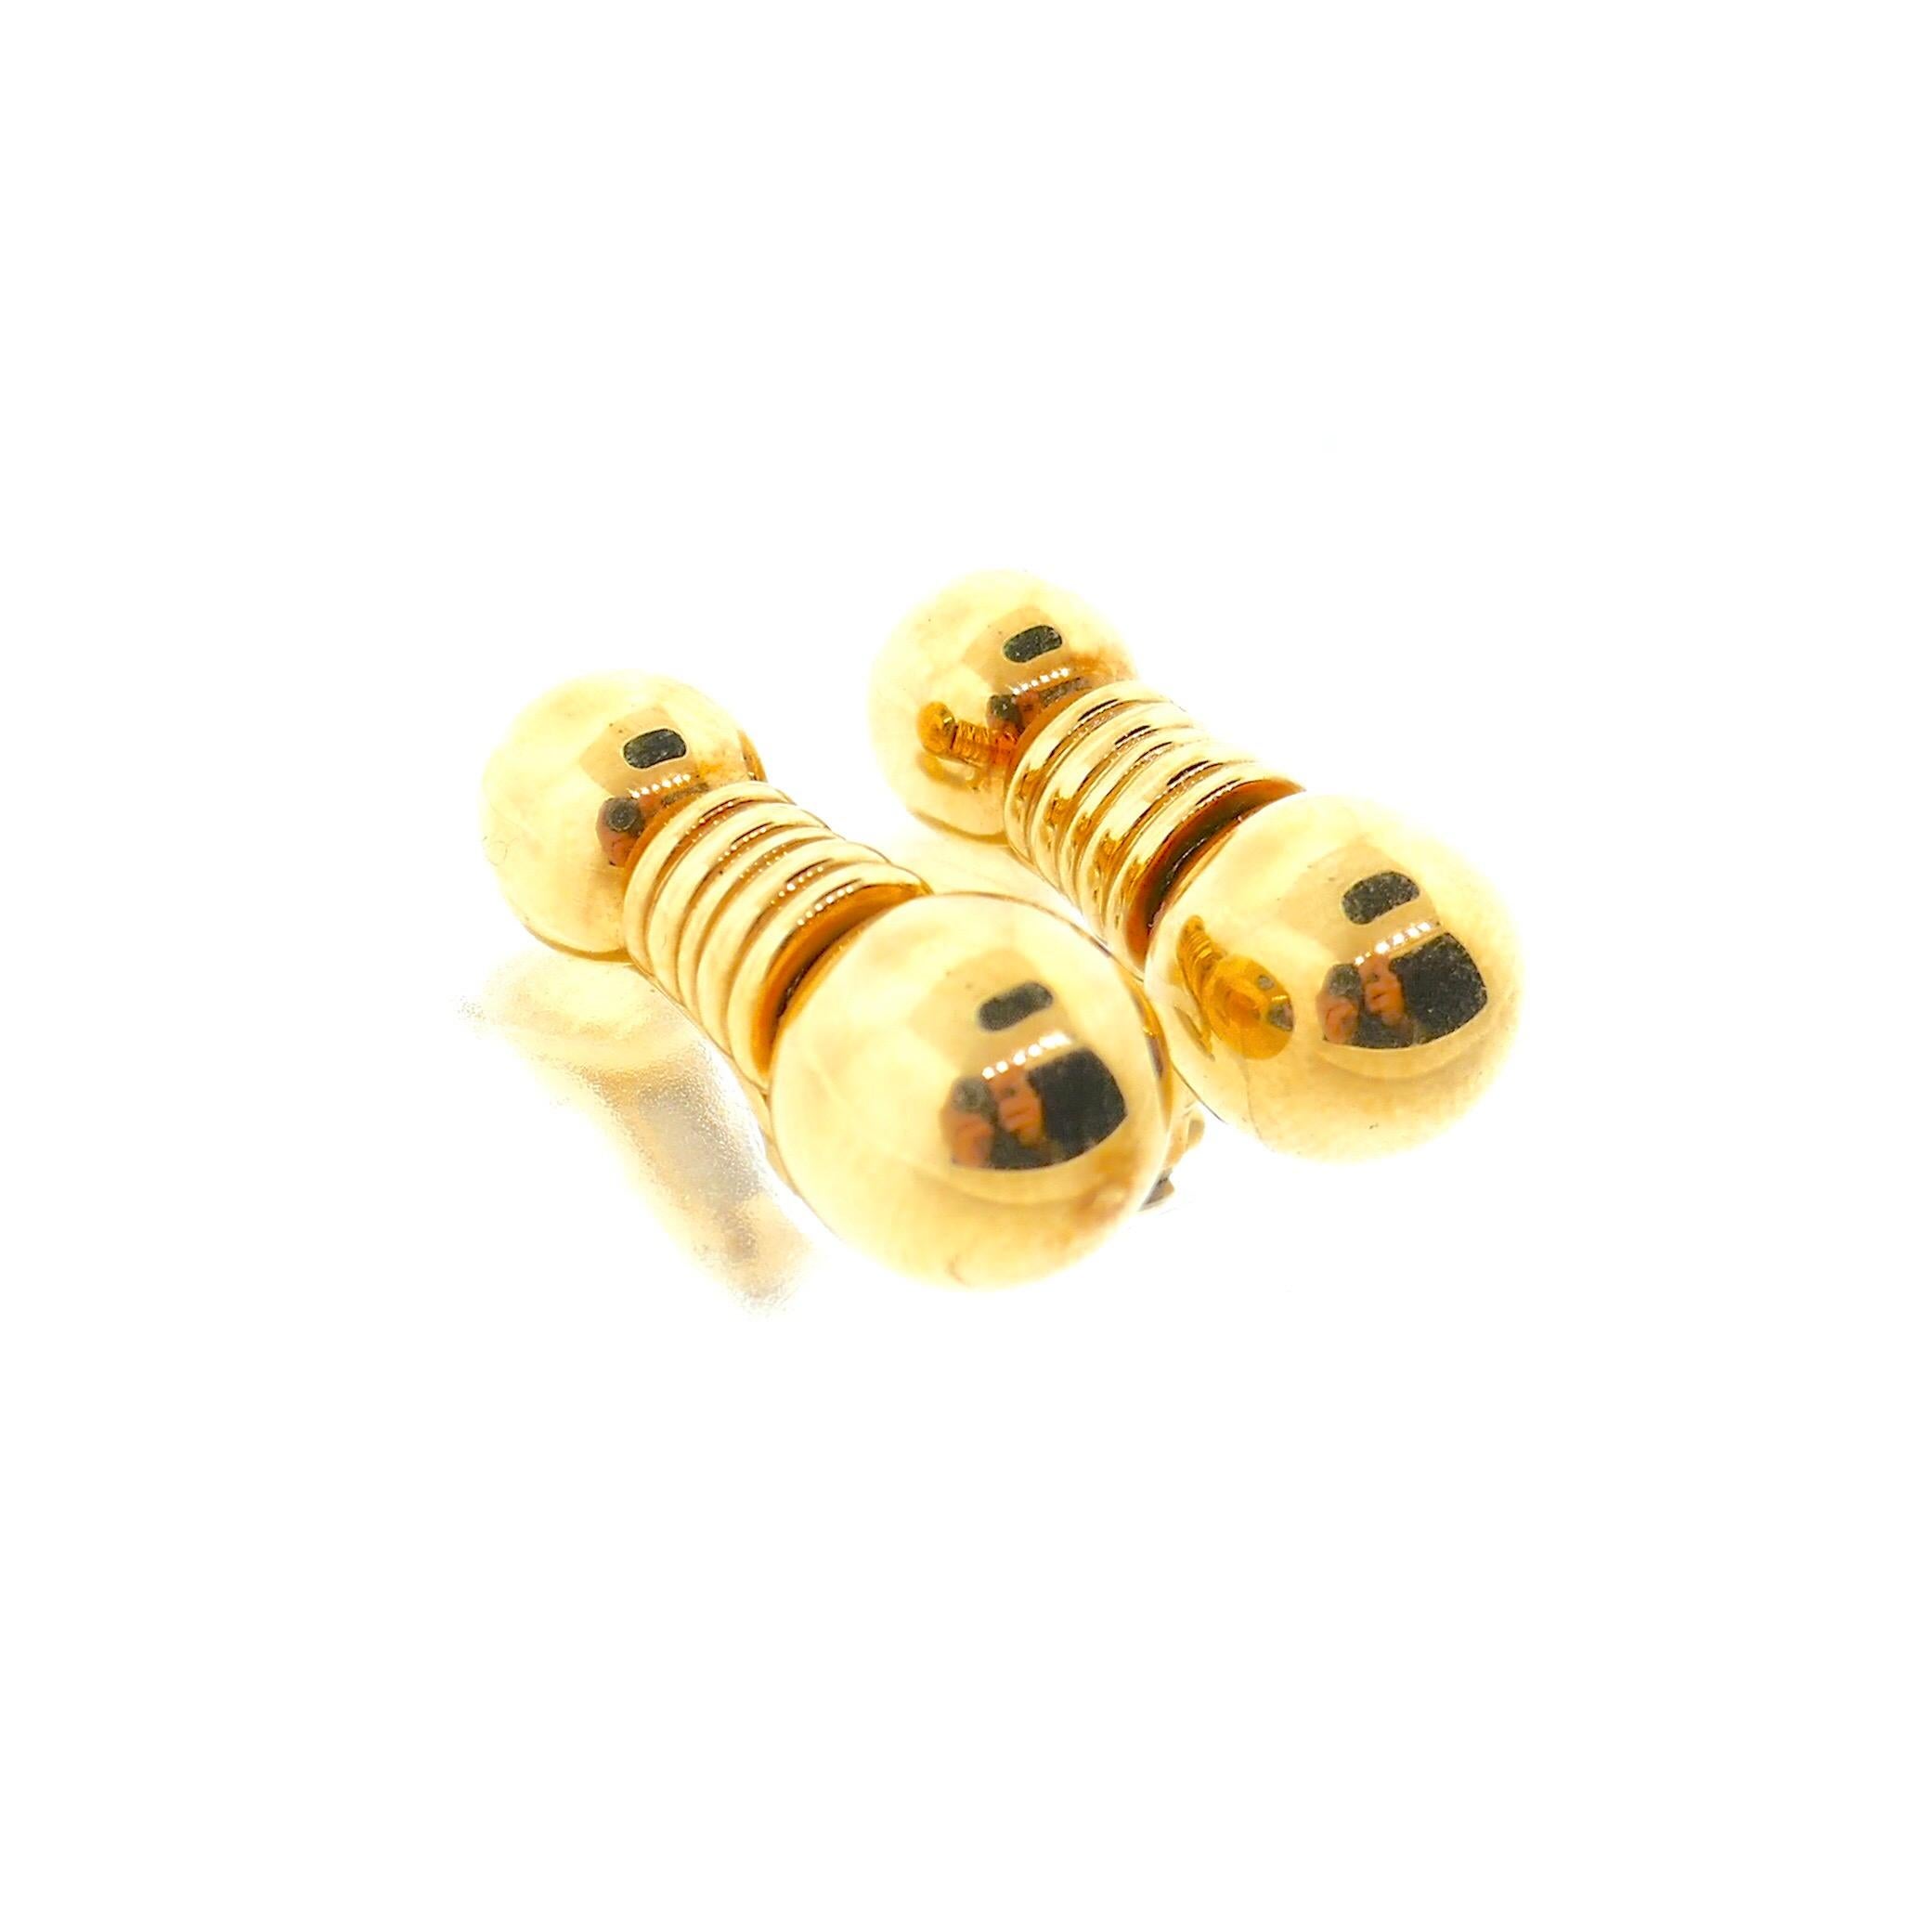 Boucheron 18 Karat Yellow Gold Clip On Earrings

These are beautiful Boucheron earring circa 1980s. They are stacked ball motif for a look that is as chic as it is timeless. They truly reflect the eternal elegance of Boucheron, 
they are versatile